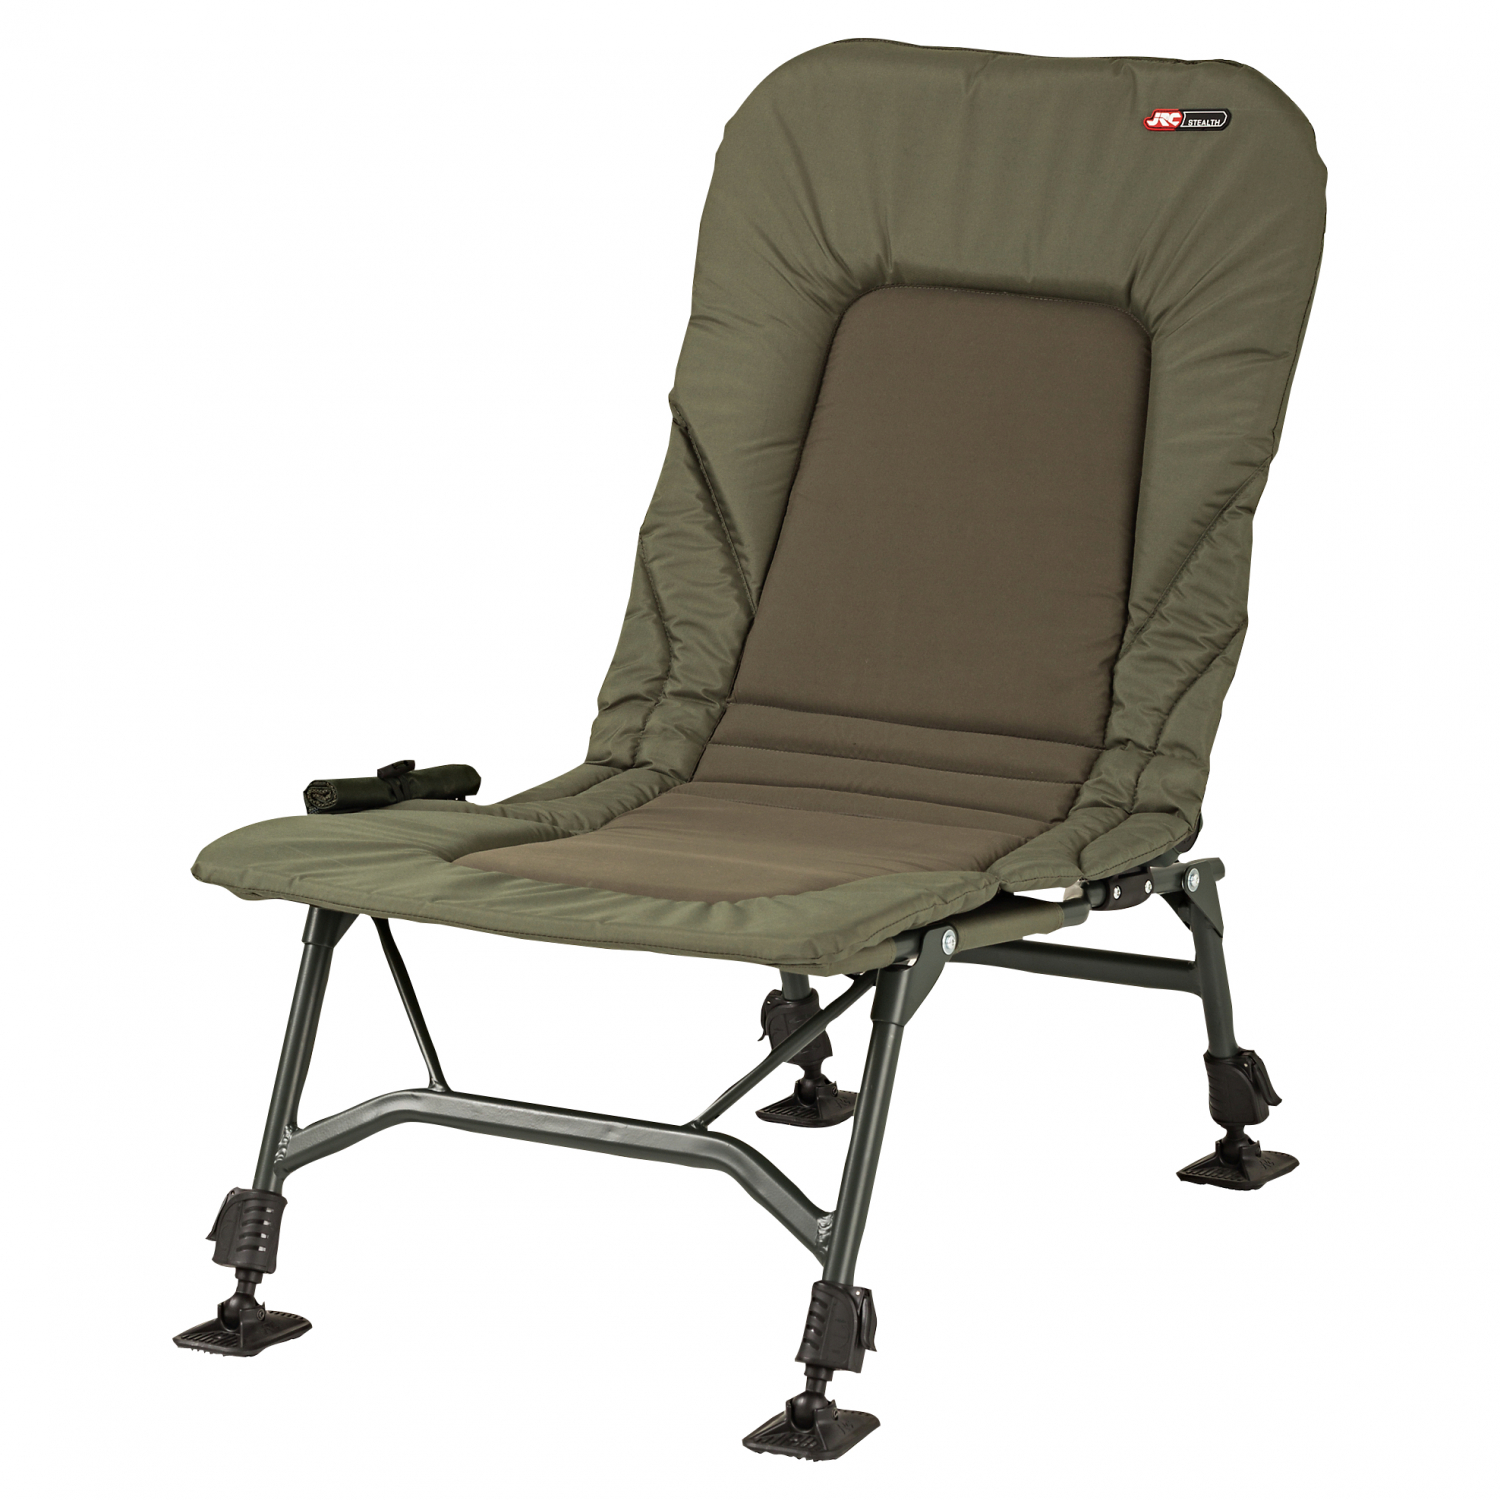 JRC Chair Stealth Recliner at low prices